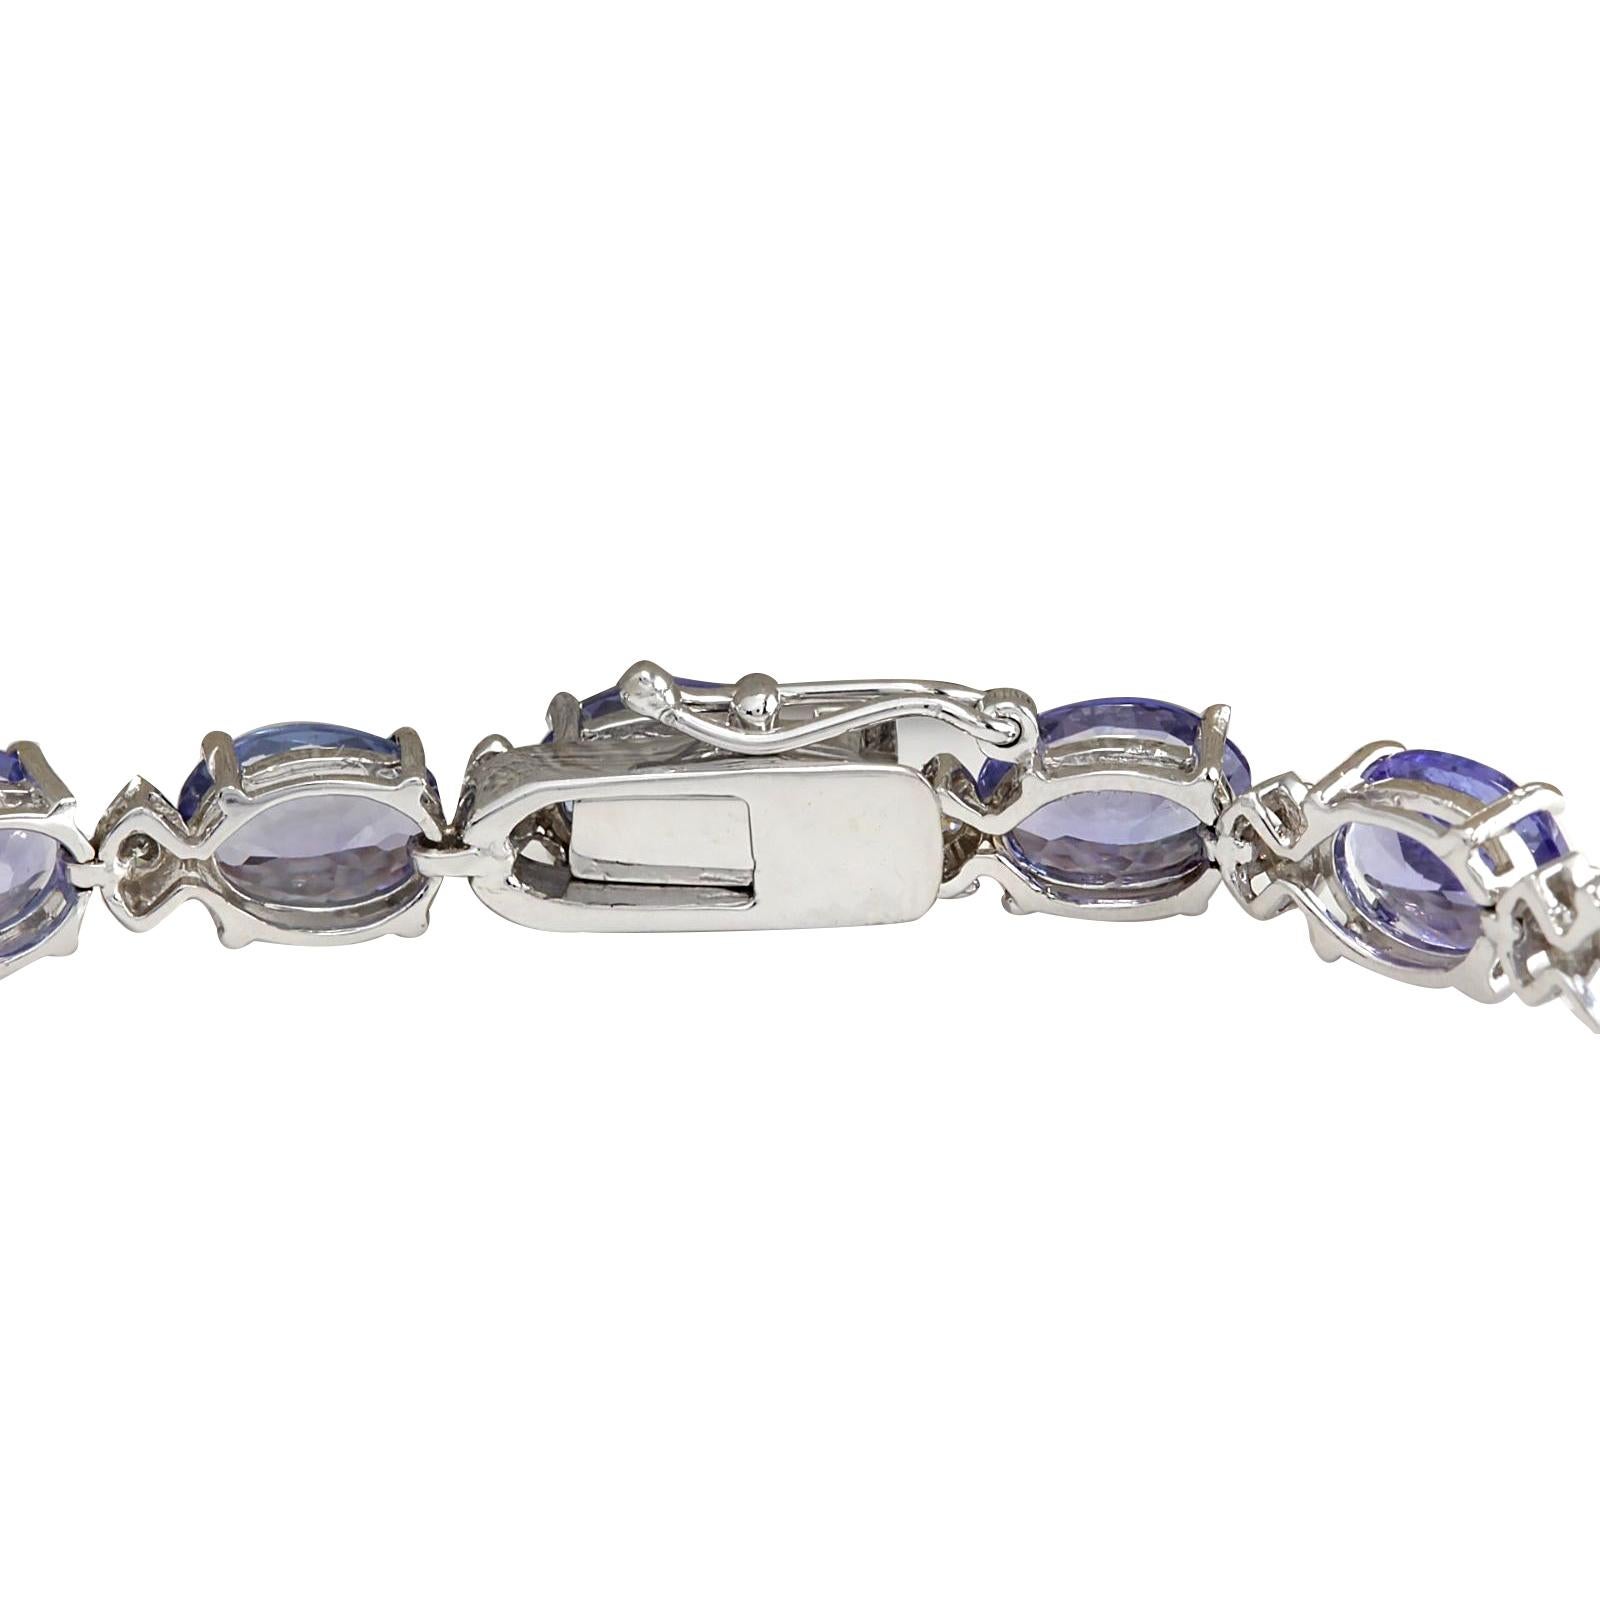 Stamped: 18K White Gold<br />Total Bracelet Weight: 10.0 Grams<br />Bracelet Length: 7.5 Inches<br />Bracelet Width: 5.90 mm<br />Gemstone Weight: Total  Tanzanite Weight is 22.65 Carat (Measures: 6.00x7.50 mm)<br />Color: Blue<br />Diamond Weight: